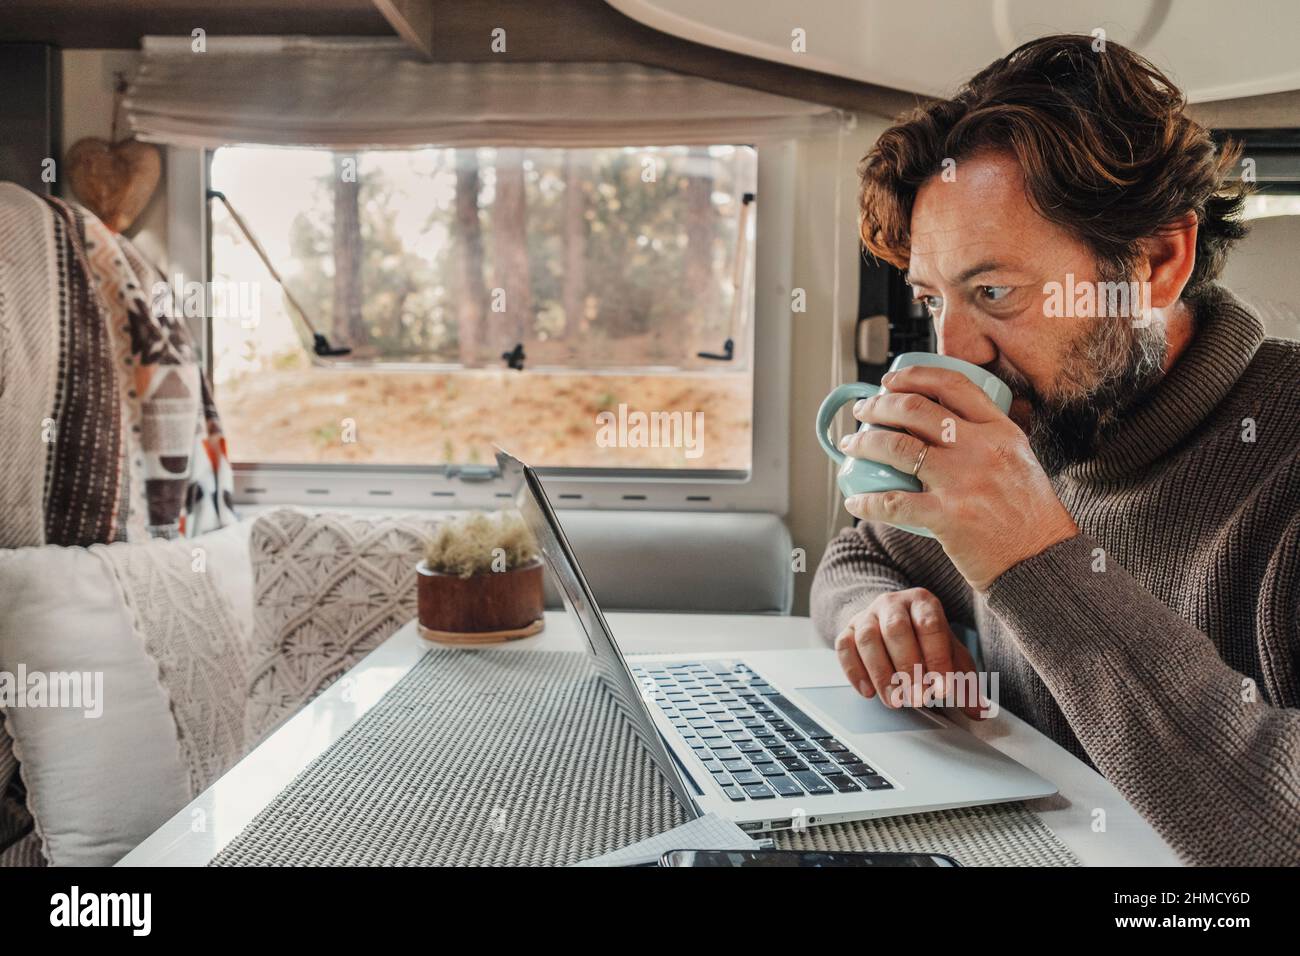 Mature man working on laptop computer inside a camper van with nature outdoors view outside the window. Concept of freedom and vanlife lifestyle. Smar Stock Photo